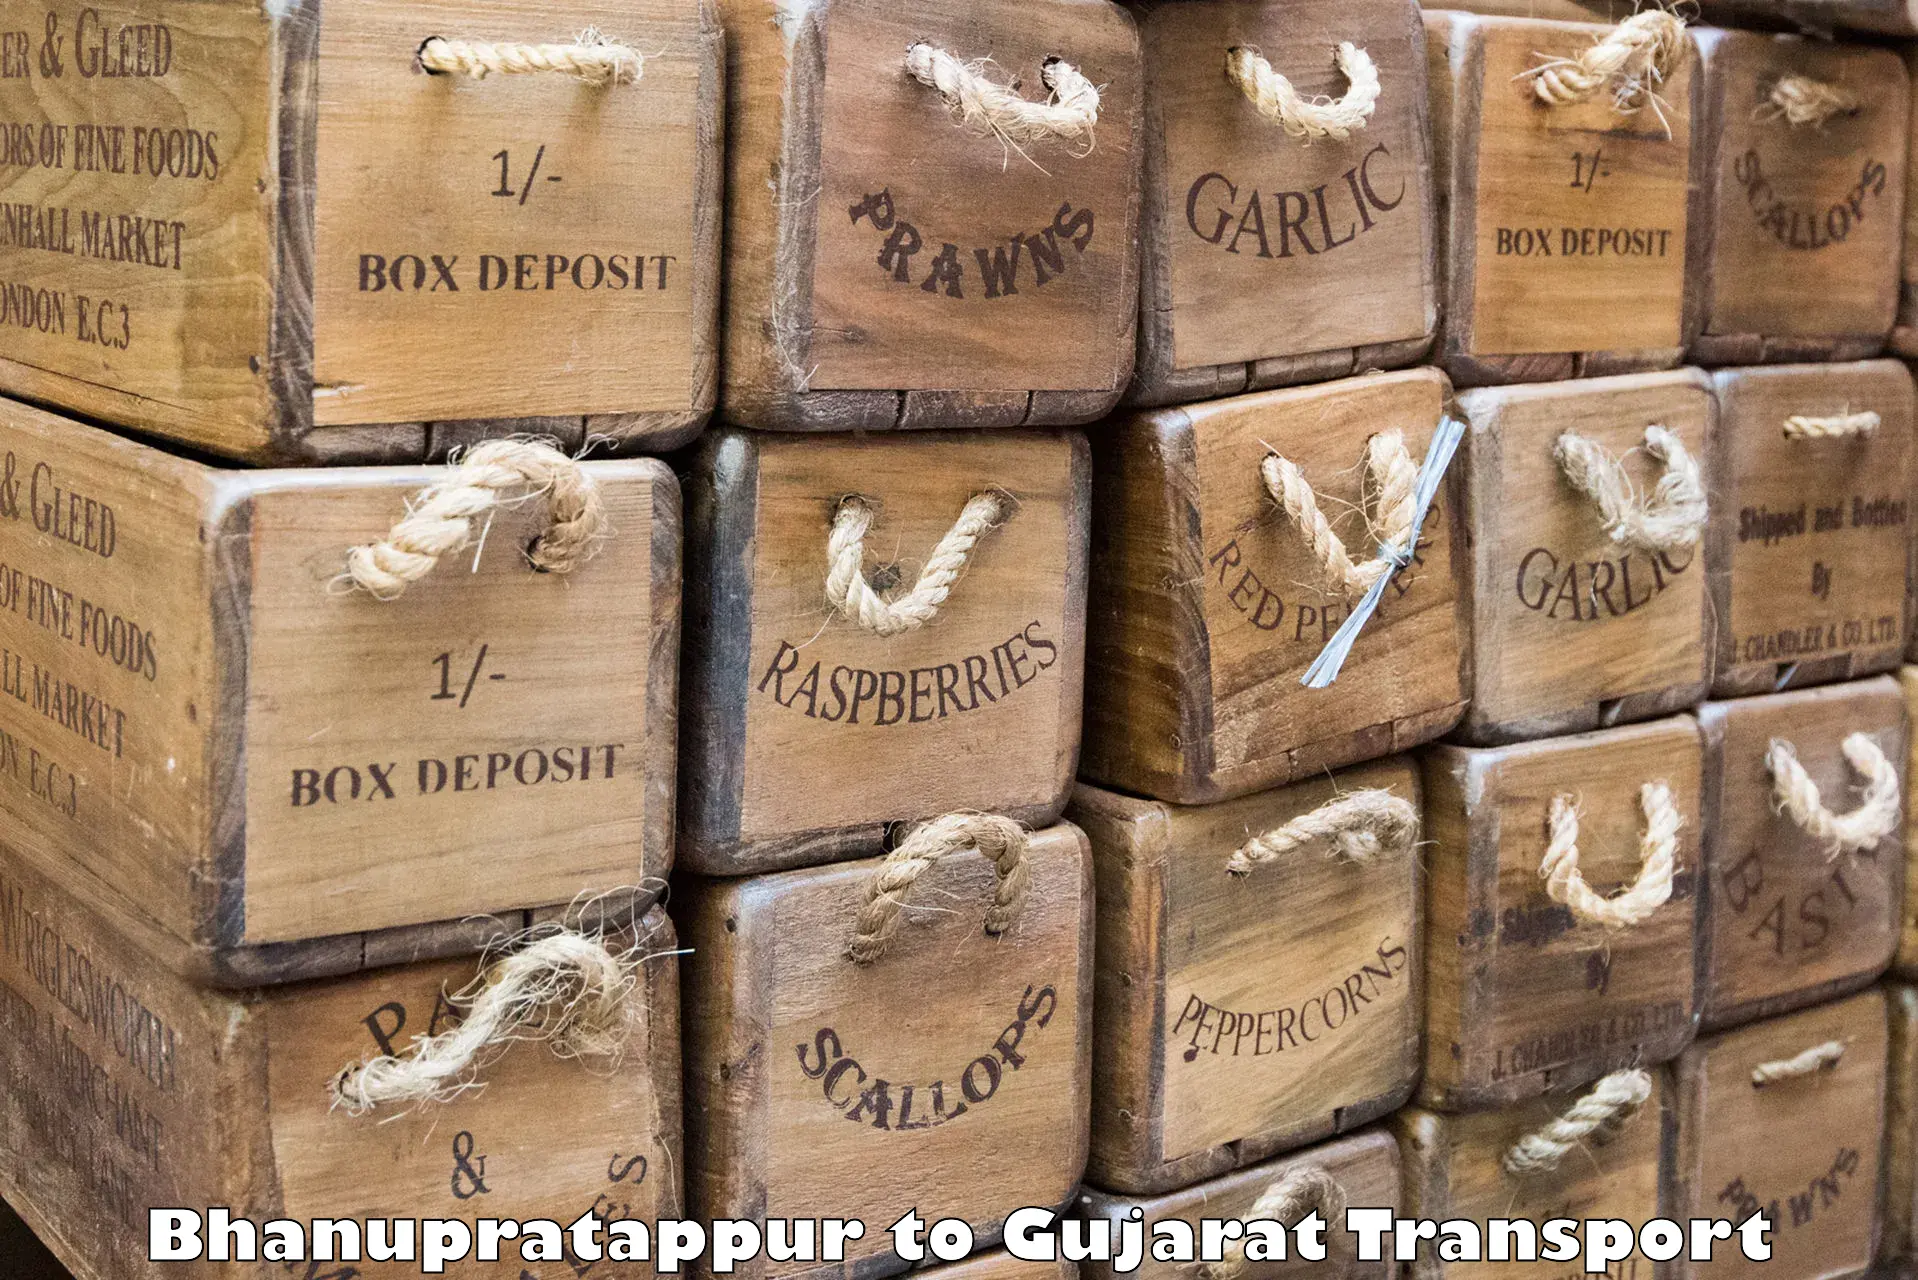 Truck transport companies in India Bhanupratappur to Ankleshwar